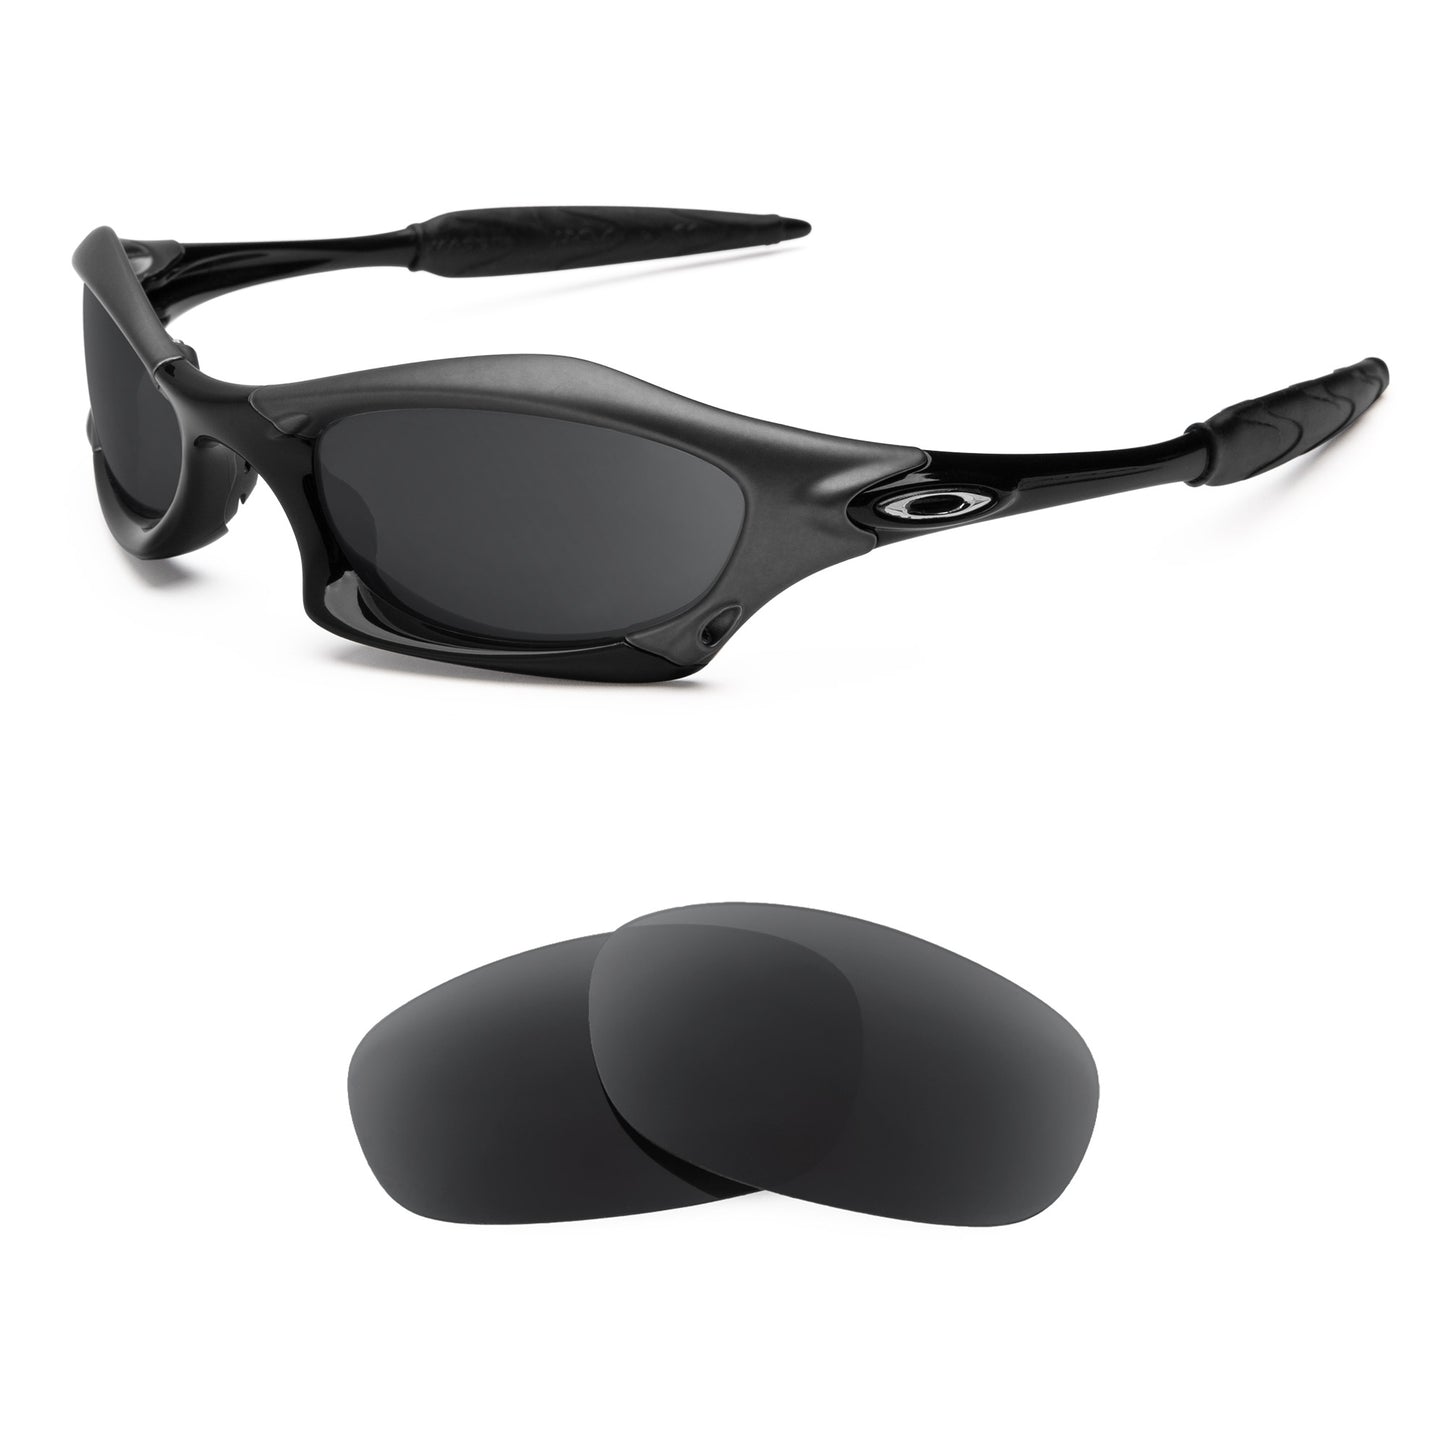 Oakley Splice sunglasses with replacement lenses